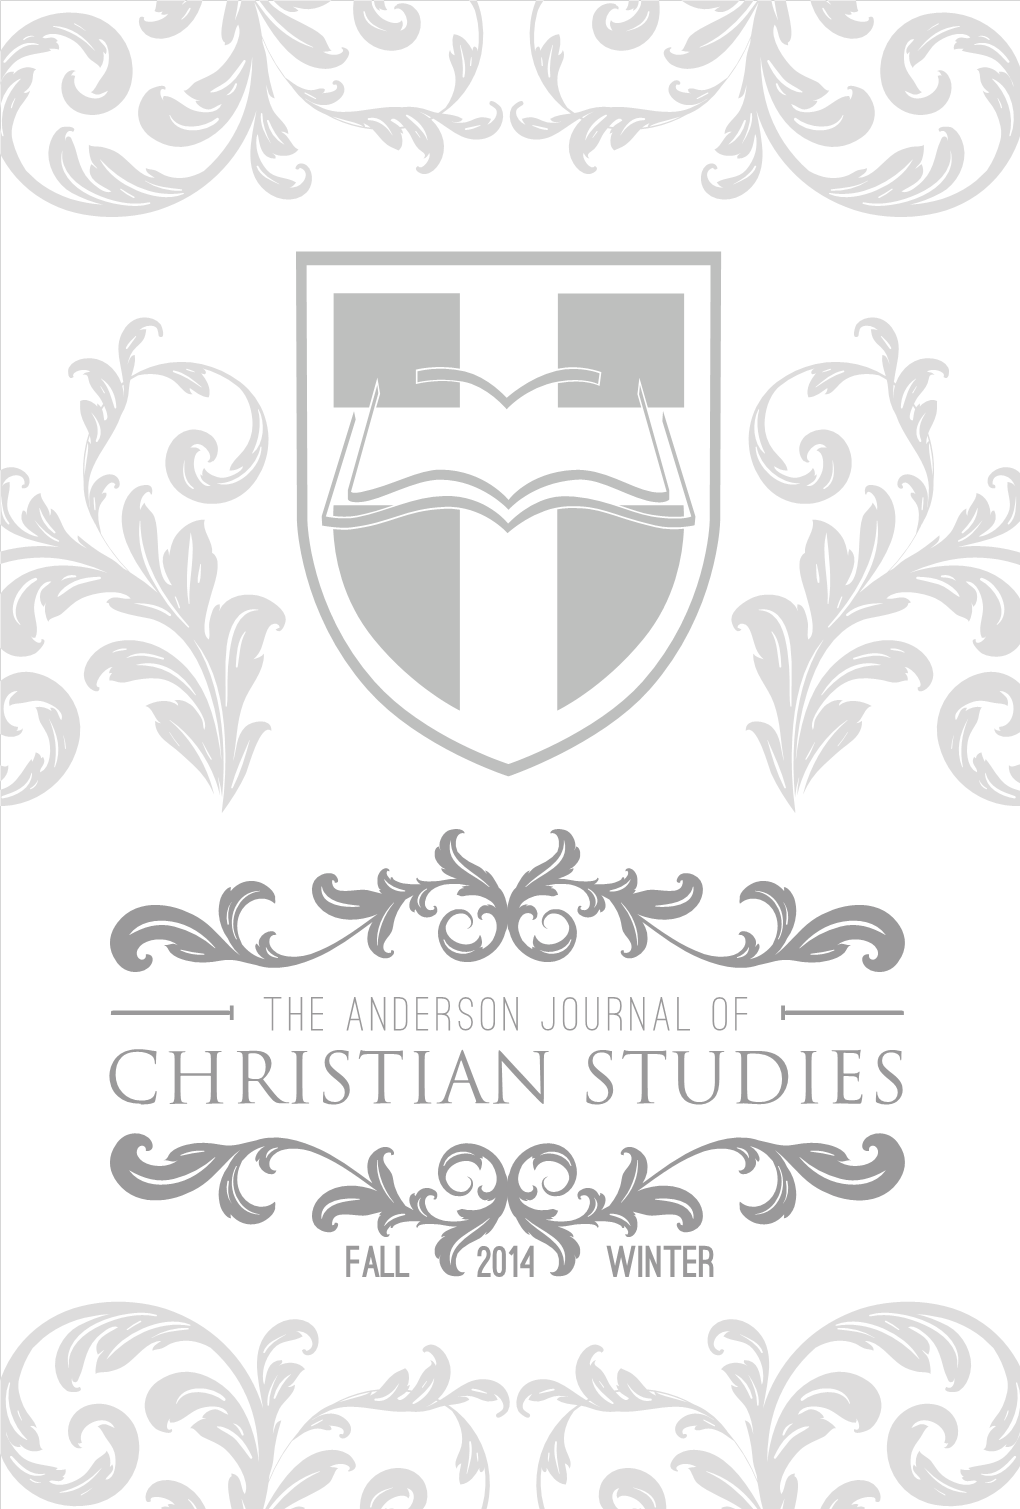 The Anderson Journal of Christian Studies